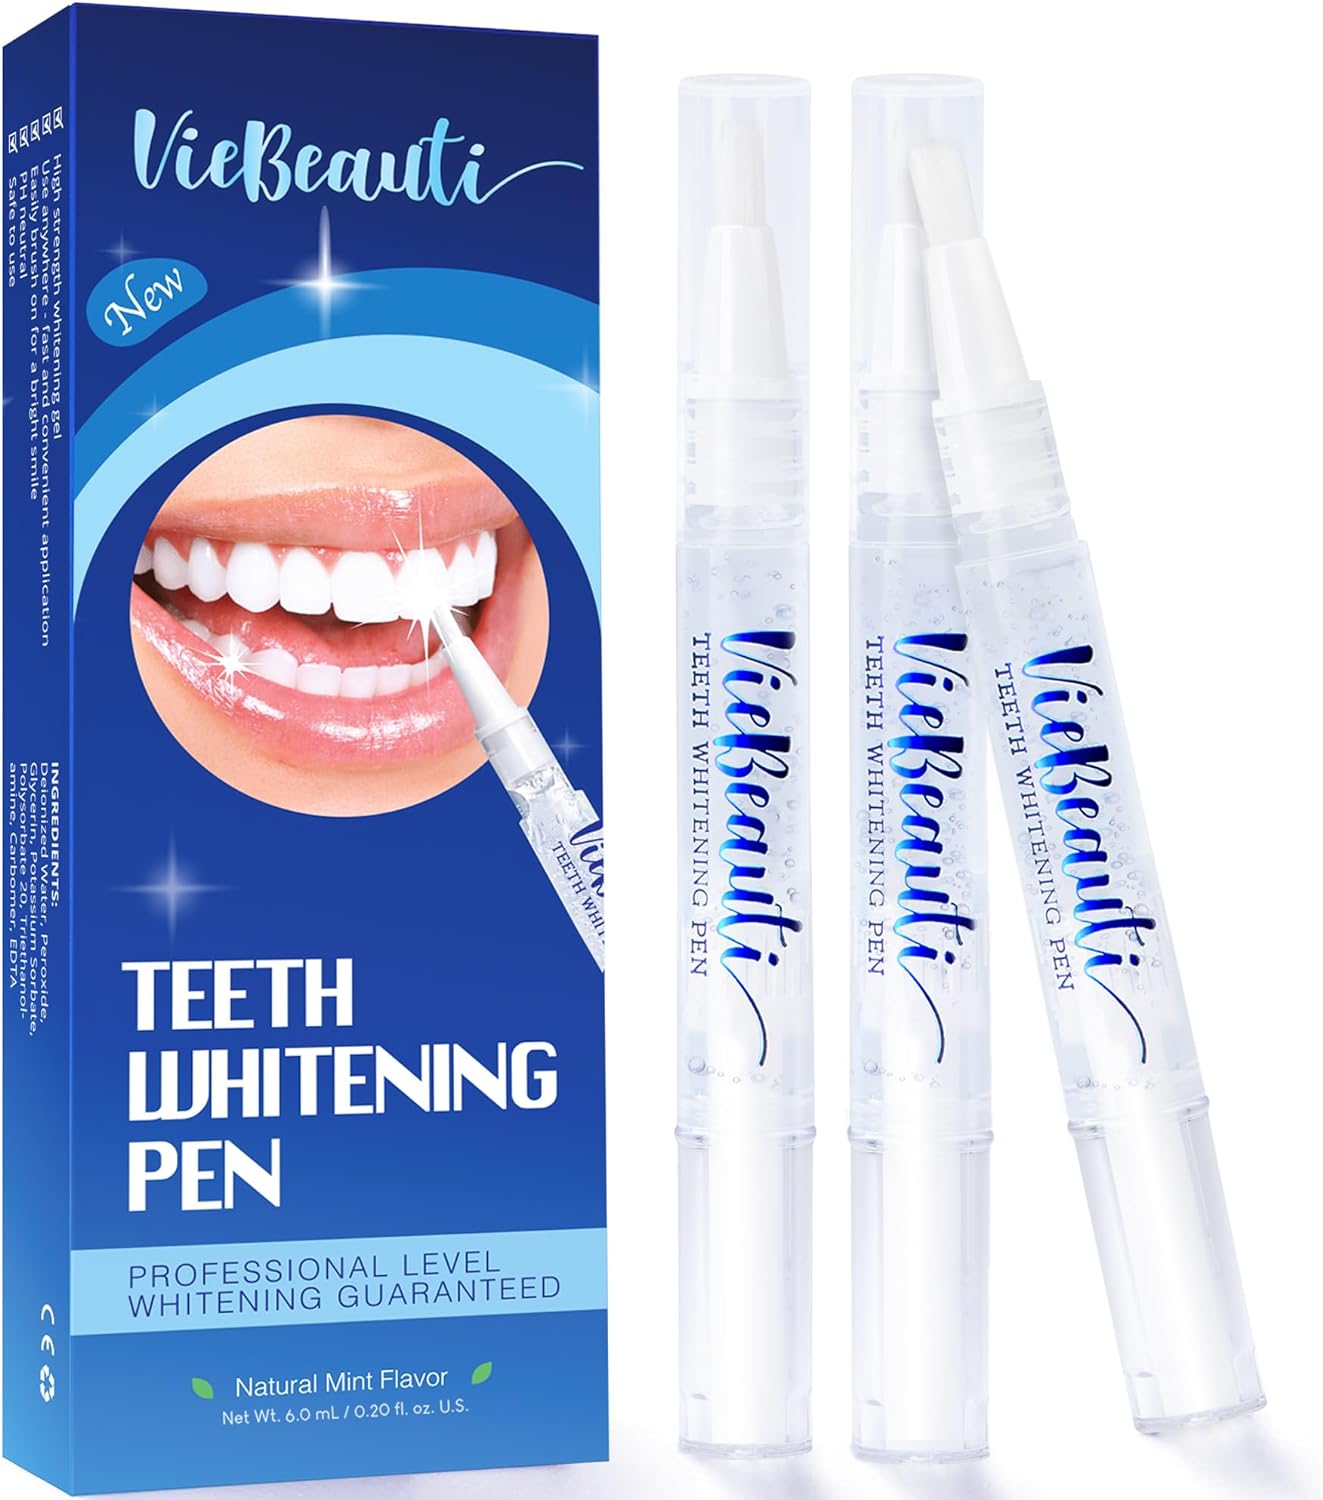 Hurry! Snag Your Discount on VieBeauti Teeth Whitening Pen (3 Pcs). Limited-Time Promo!